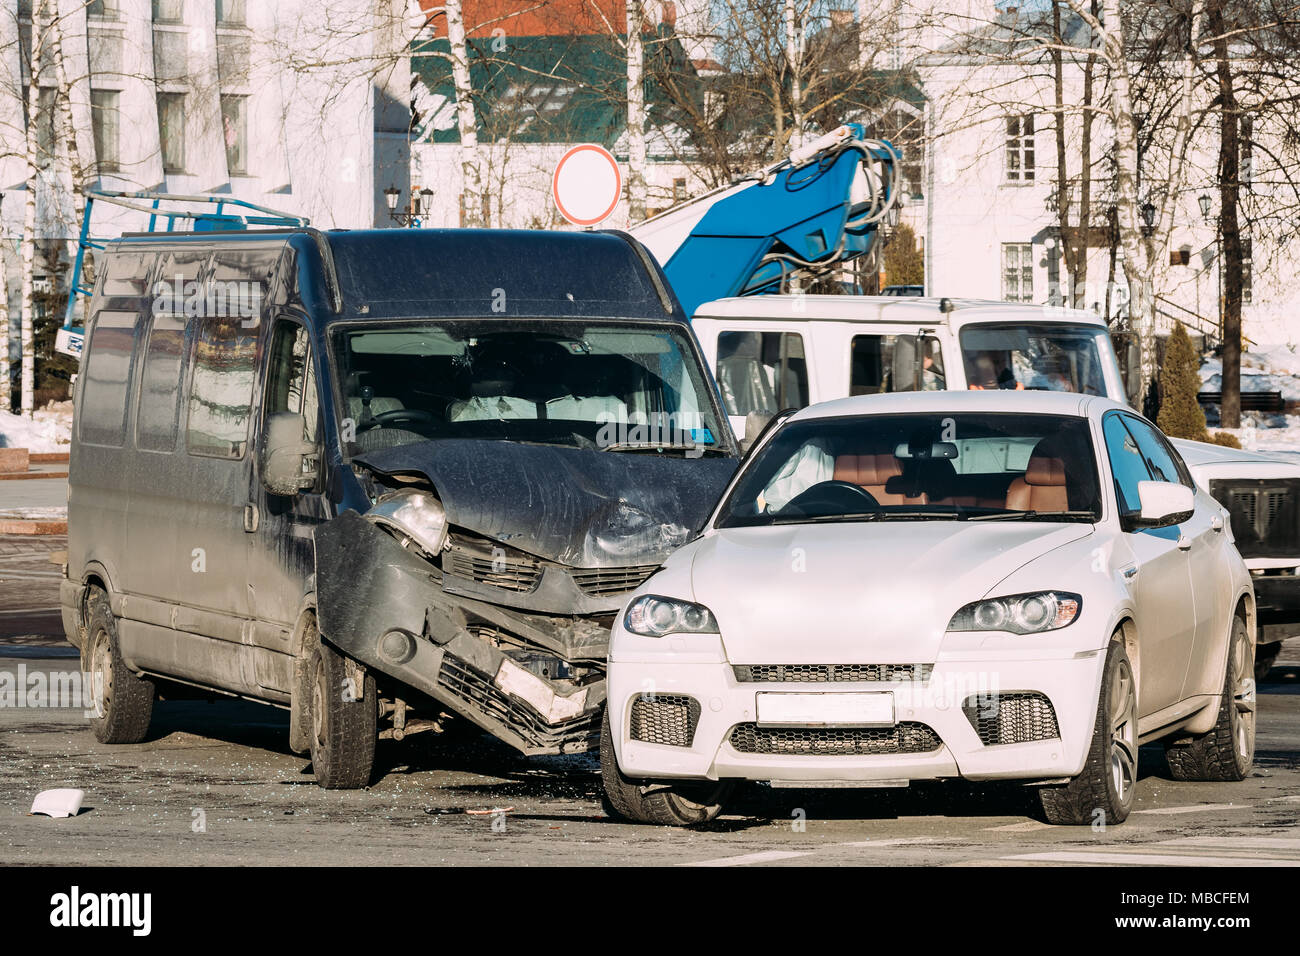 Collision Of Two Cars. Crashed Minibus And Luxury Crossover SUV Cars In City Street. Car Wreck, Accident Stock Photo